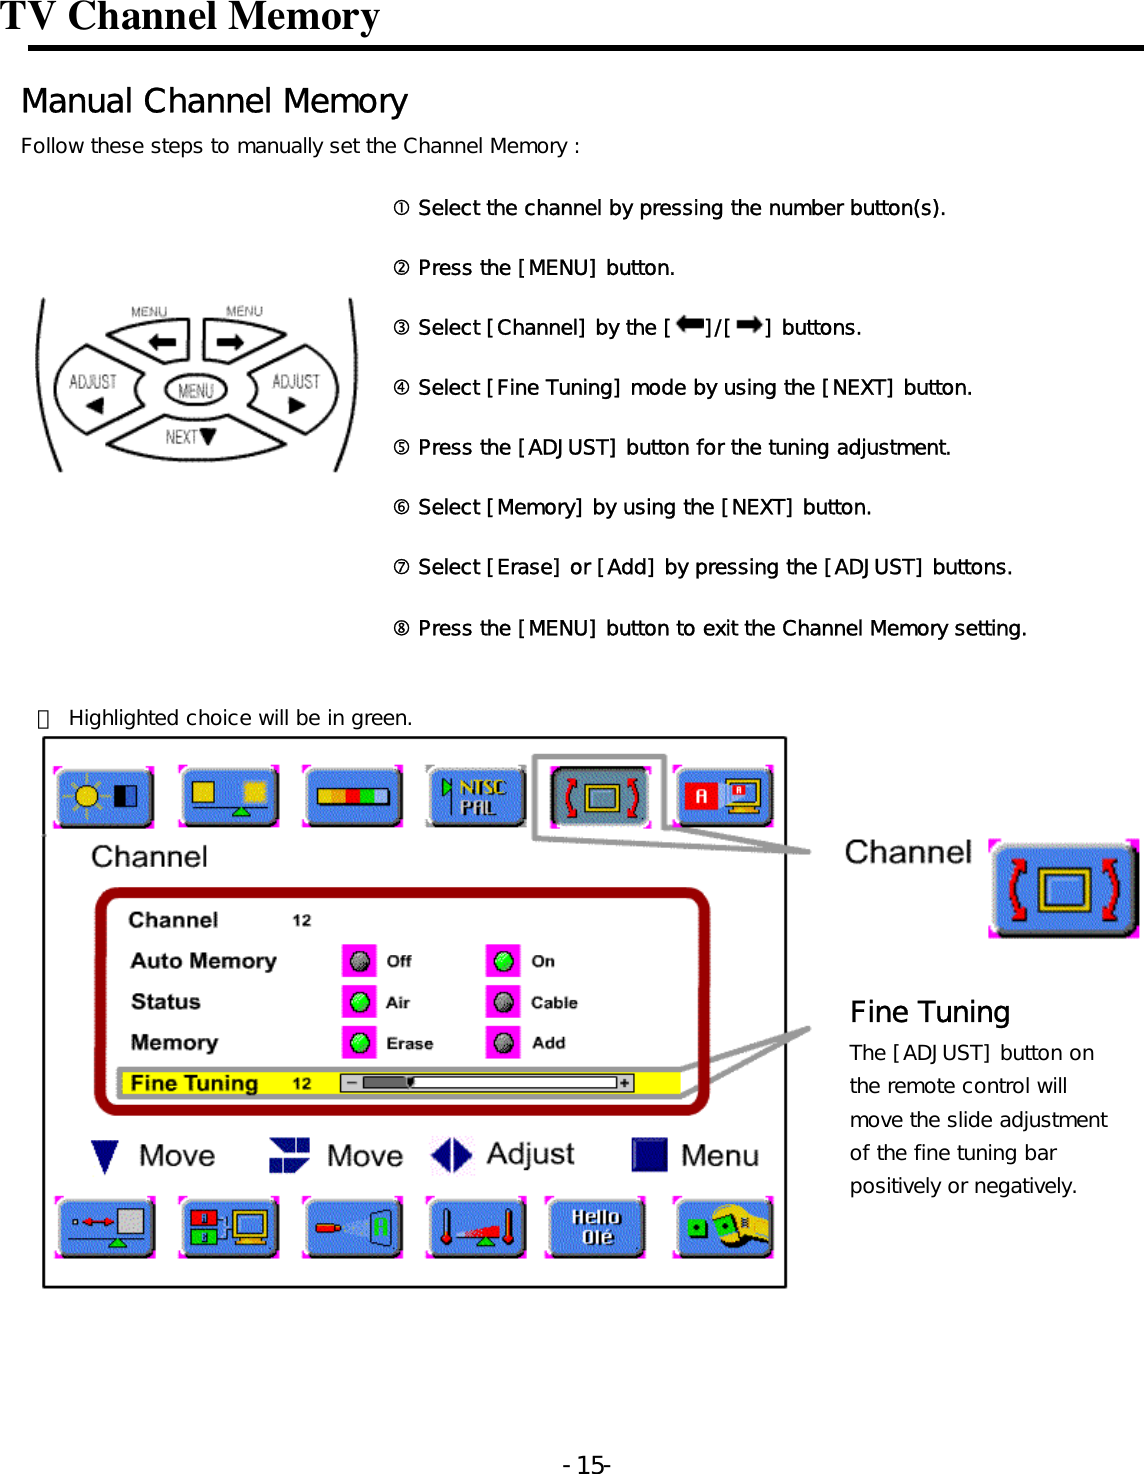 TV Channel Memory   Manual Channel Memory  Follow these steps to manually set the Channel Memory :  c Select the channel by pressing the number button(s). d Press the [MENU] button. e Select [Channel] by the [ ]/[ ] buttons. f Select [Fine Tuning] mode by using the [NEXT] button. g Press the [ADJUST] button for the tuning adjustment. h Select [Memory] by using the [NEXT] button. i Select [Erase] or [Add] by pressing the [ADJUST] buttons.    j Press the [MENU] button to exit the Channel Memory setting.  ※ Highlighted choice will be in green.  Fine Tuning The [ADJUST] button on the remote control will move the slide adjustment of the fine tuning bar positively or negatively.   -  - 15